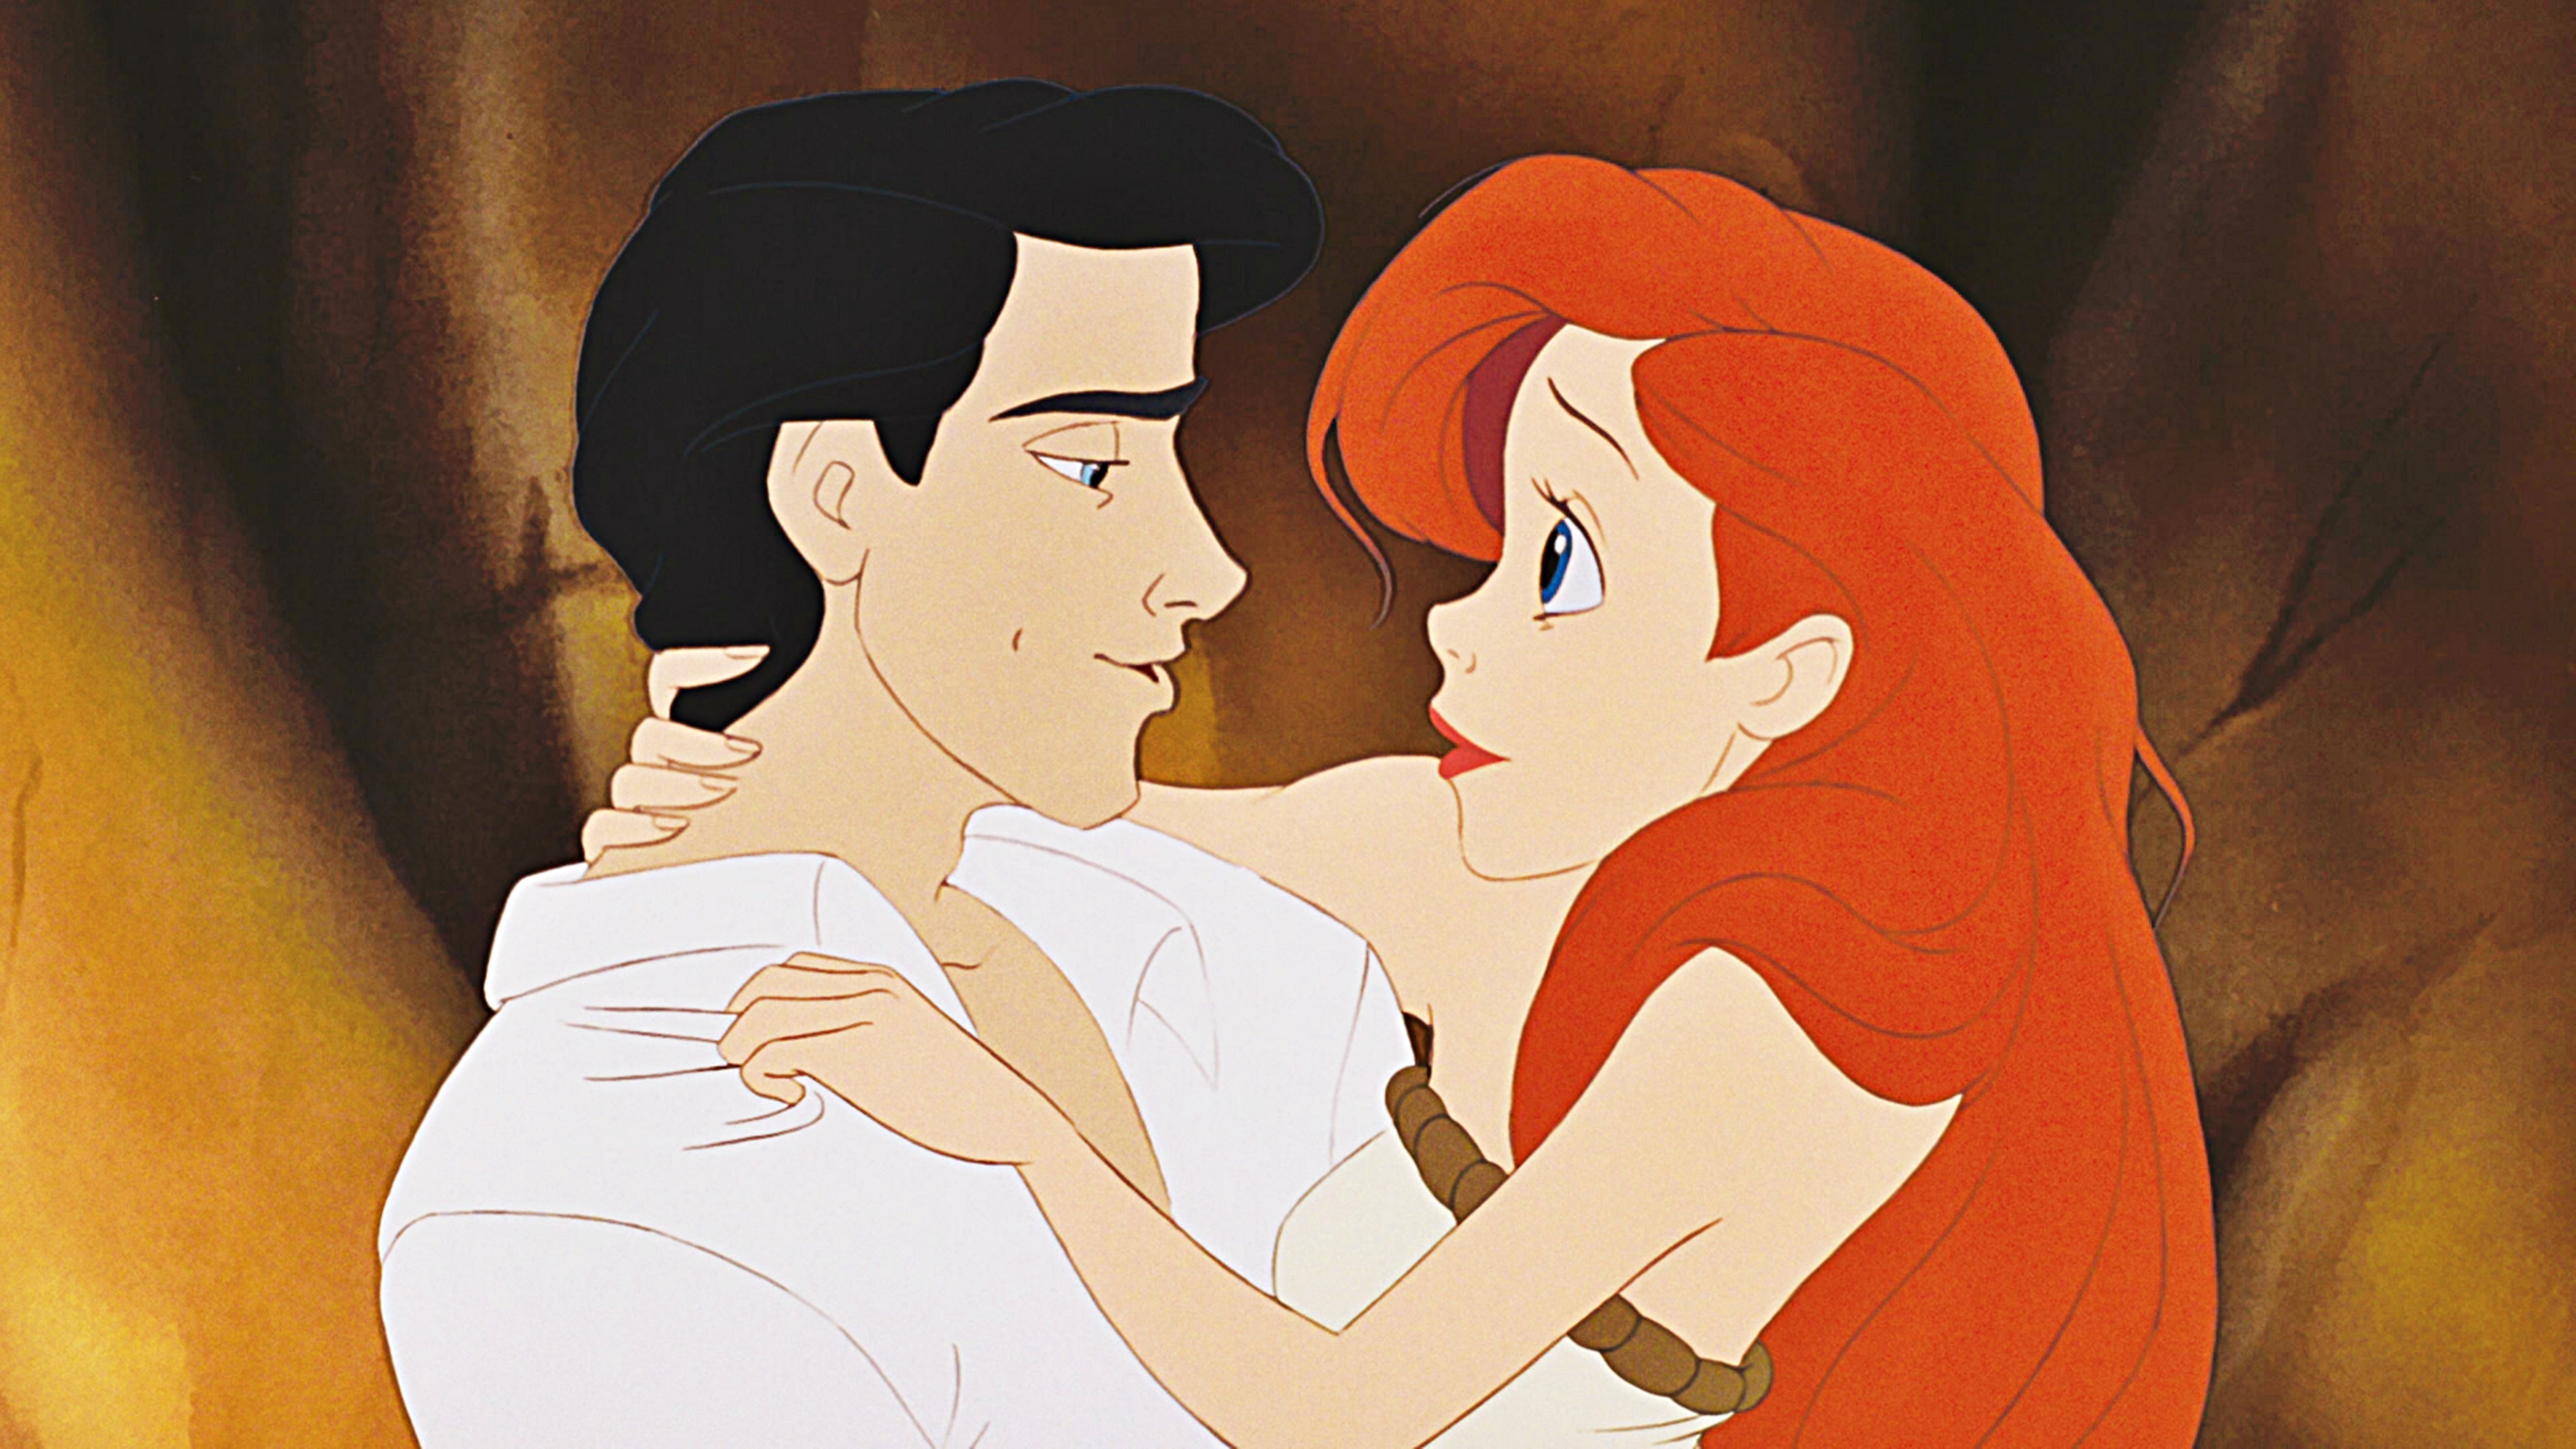 Walt Disney Screencapture of Prince Eric and Princess Ariel from "The ...